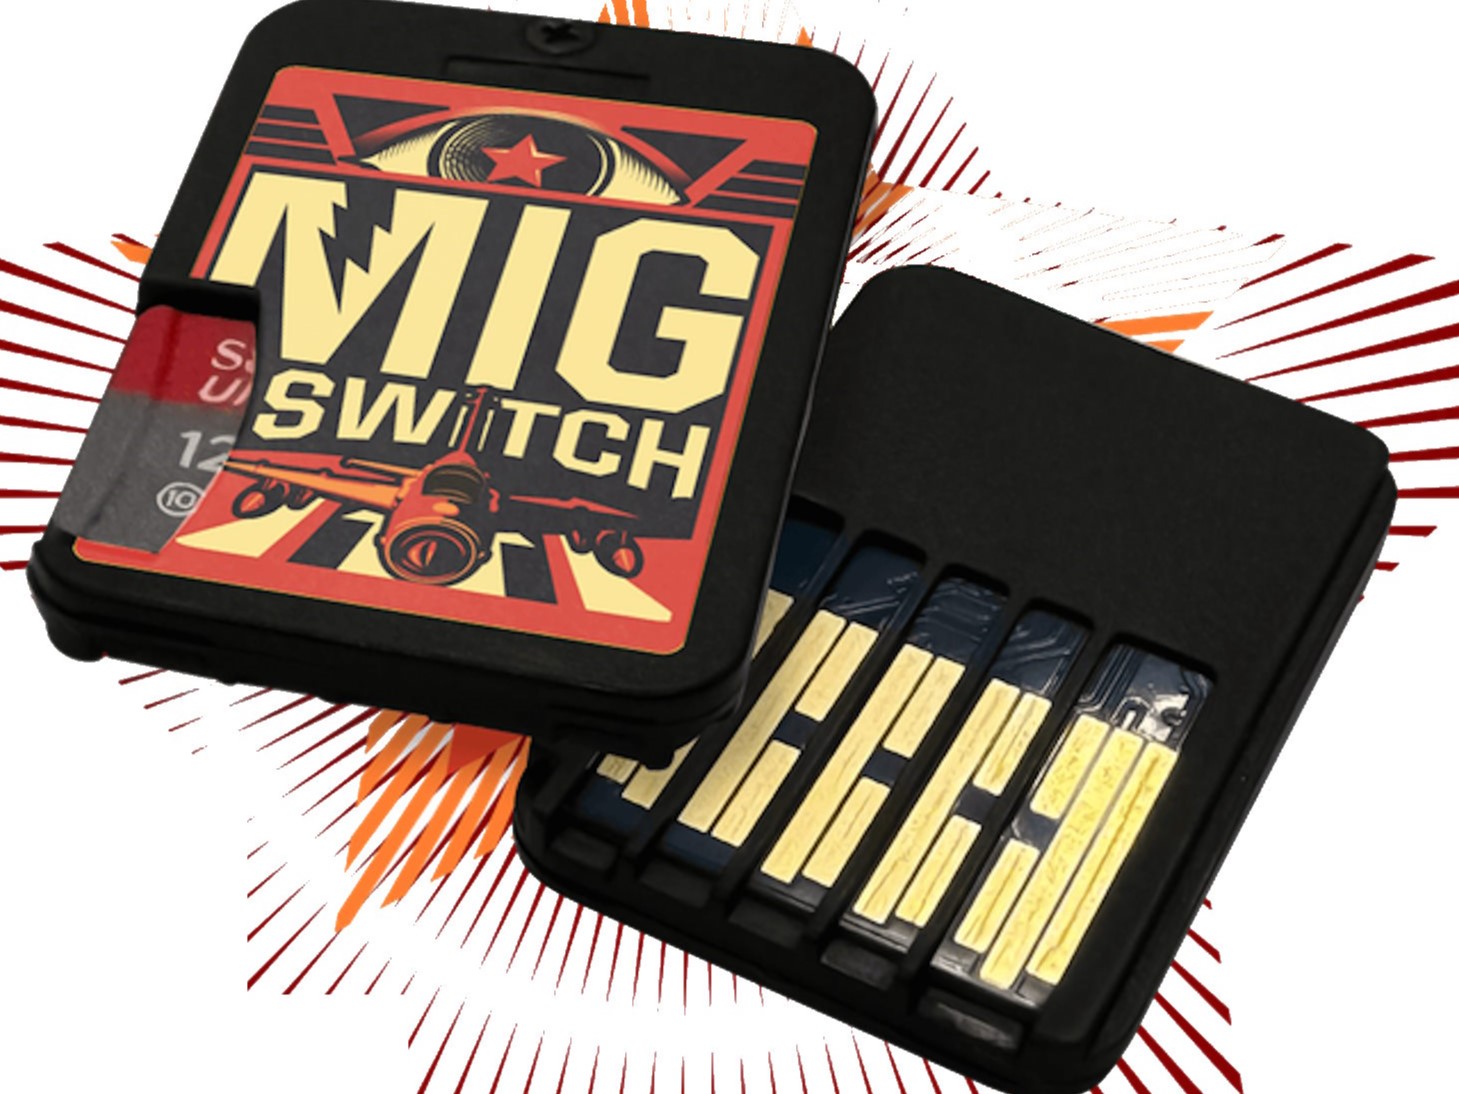 MIG Switch: Flashcard for Nintendo Switch is now available for pre